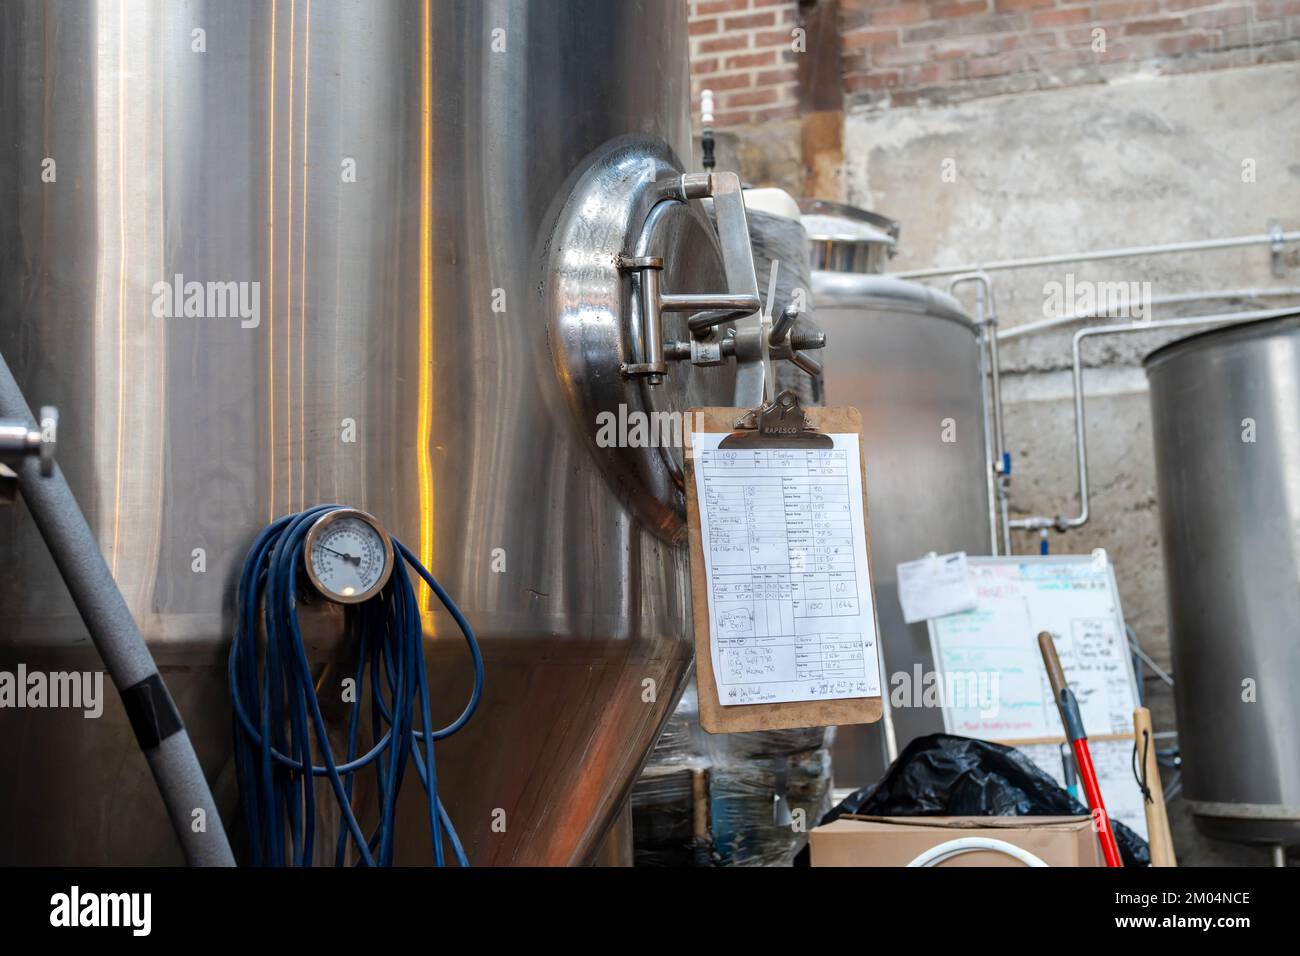 Newcastle upon Tyne, UK: December 3rd, 2022: Northern Alchemy's brewing equipment inside the Old Coal Yard bar and venue. Description12 Stock Photo